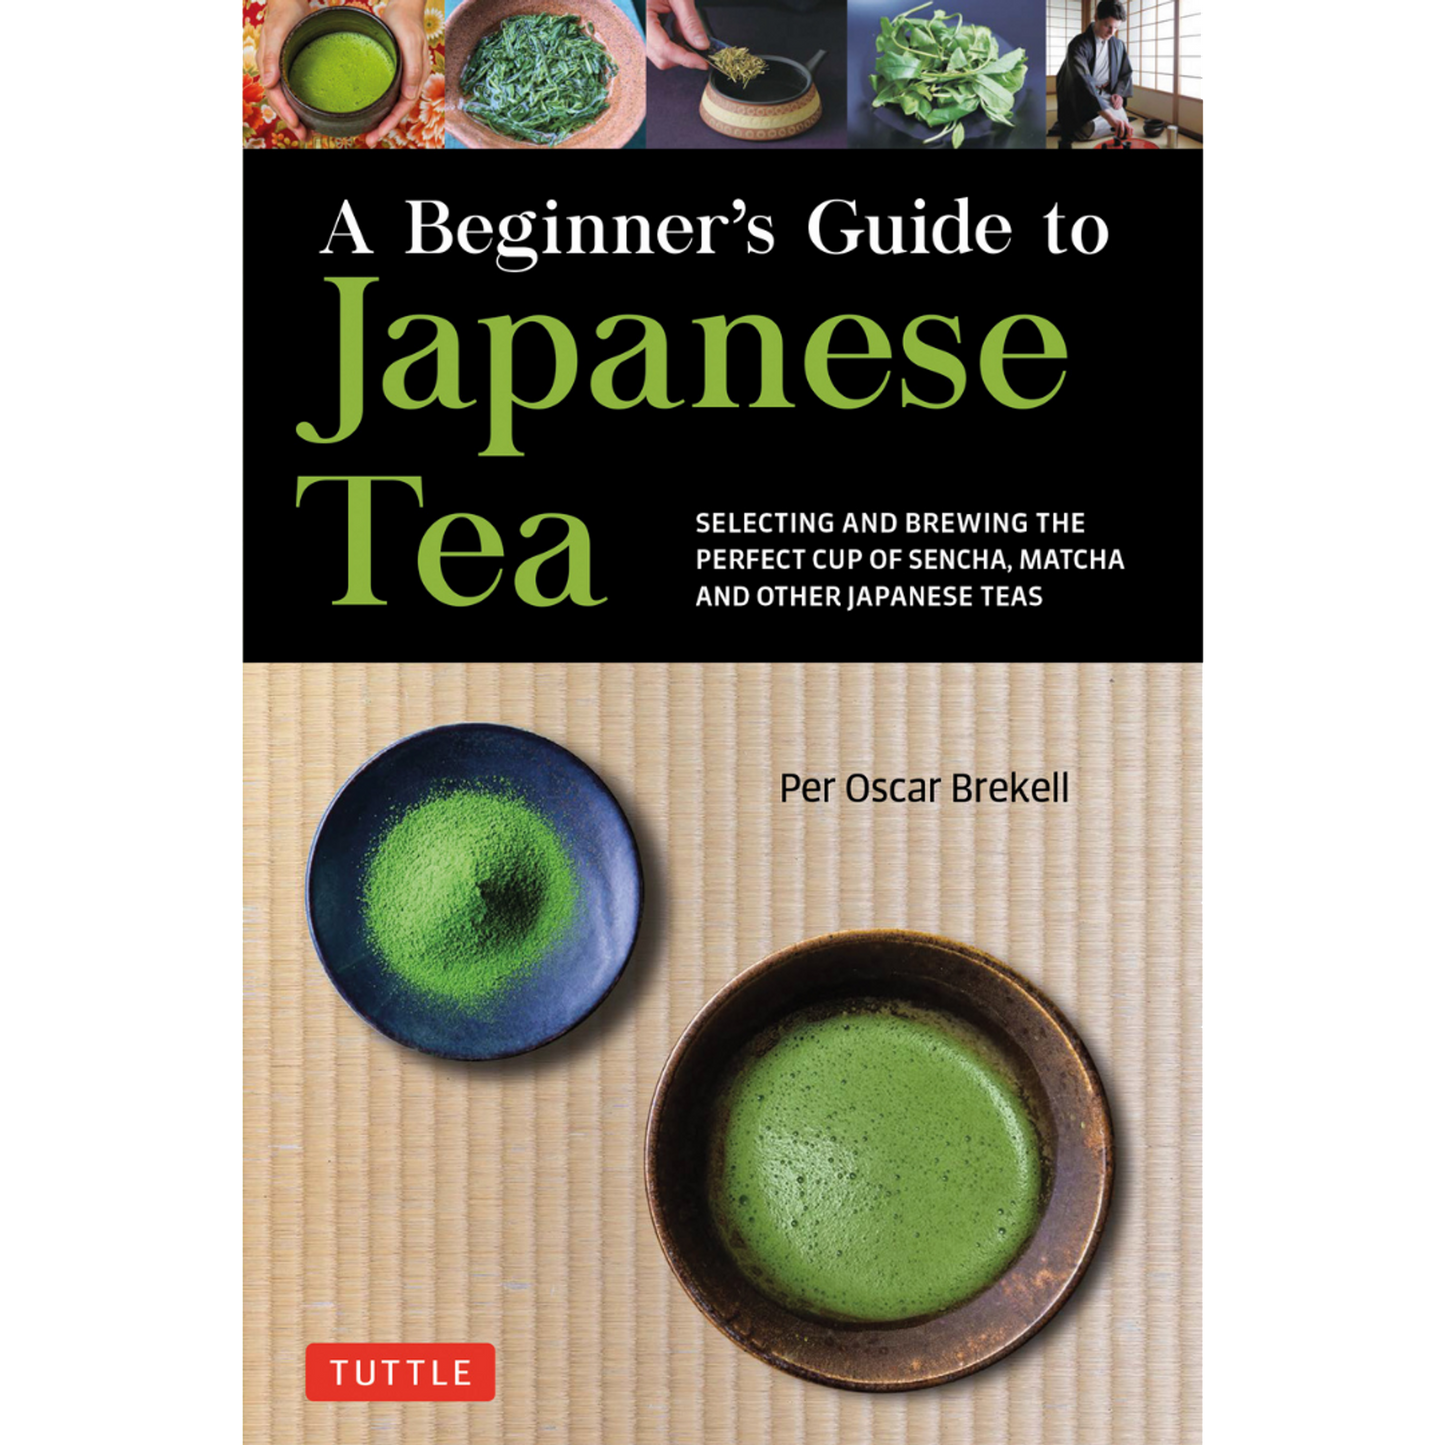 A Beginner's Guide to Japanese Tea by Per Oscar Brekell